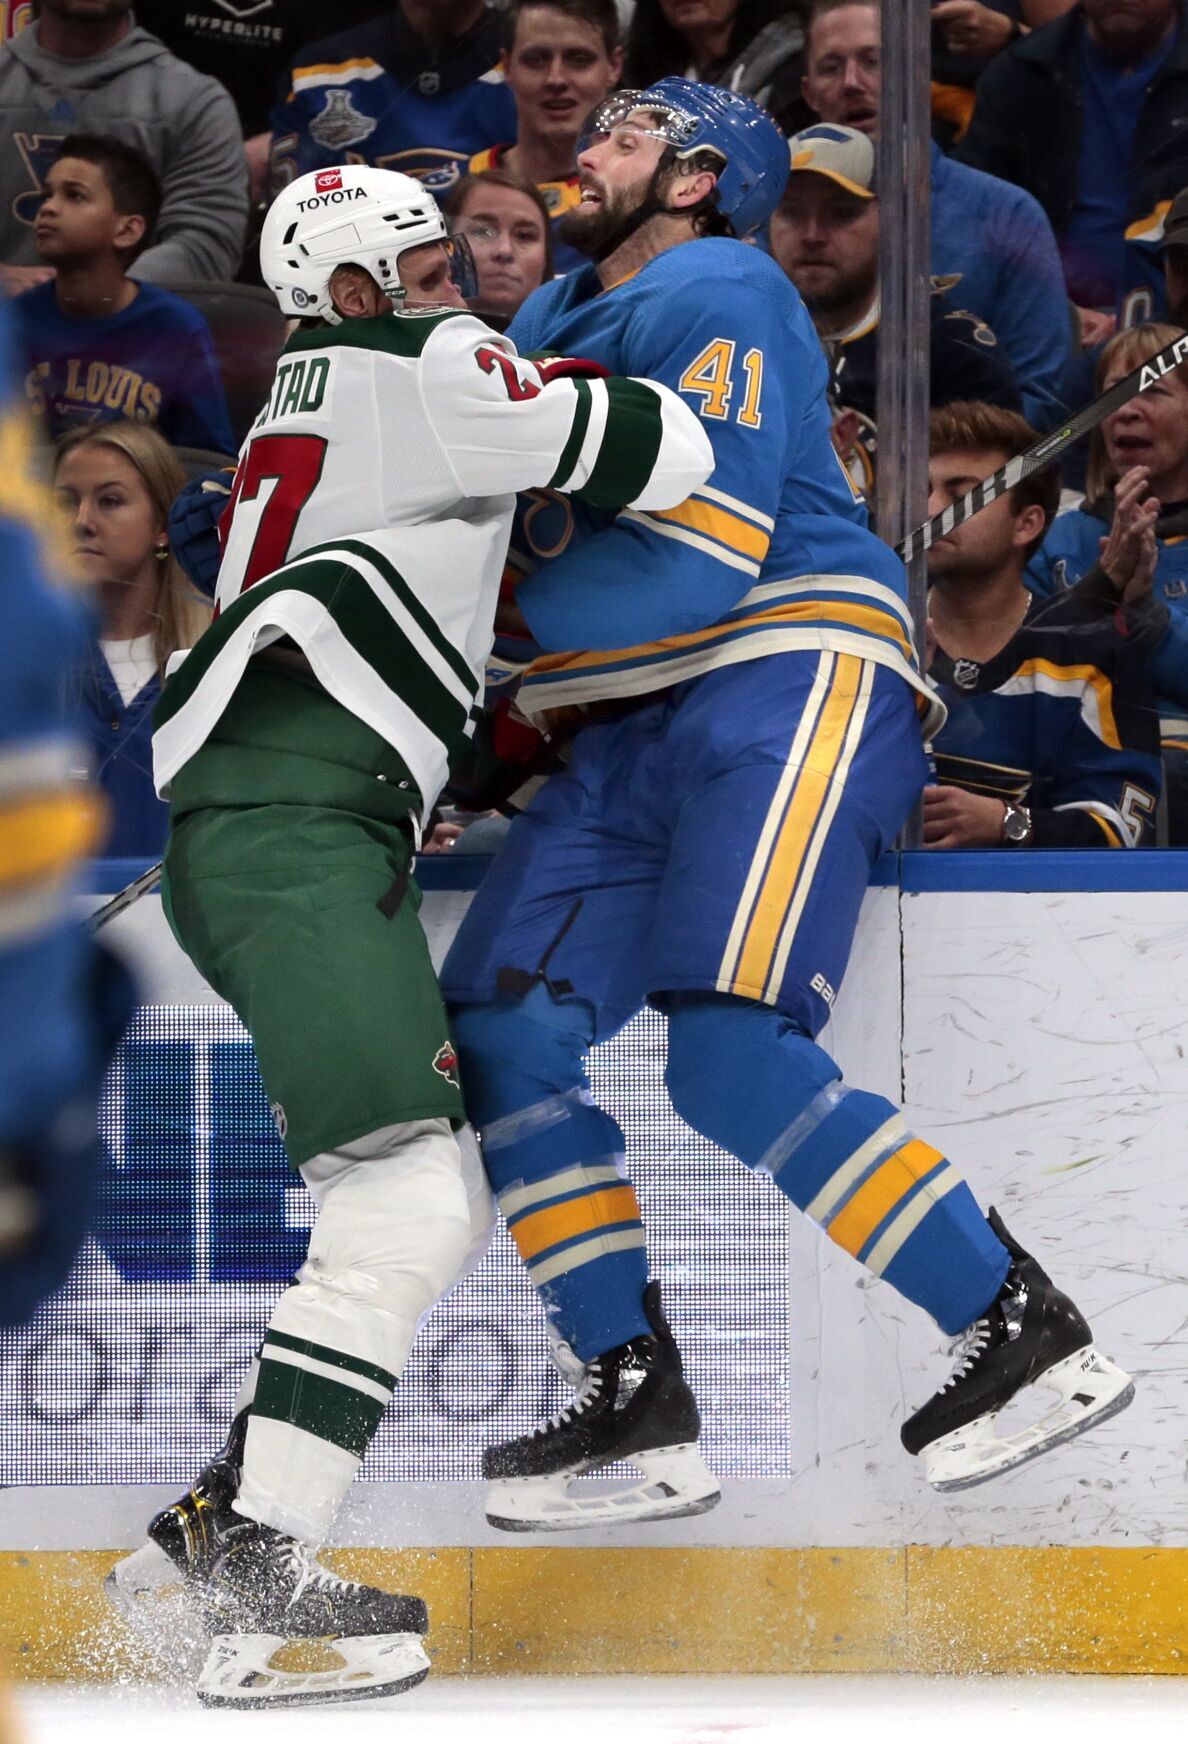 Blues secure playoff spot with 6-5 win over Wild in OT Midwest